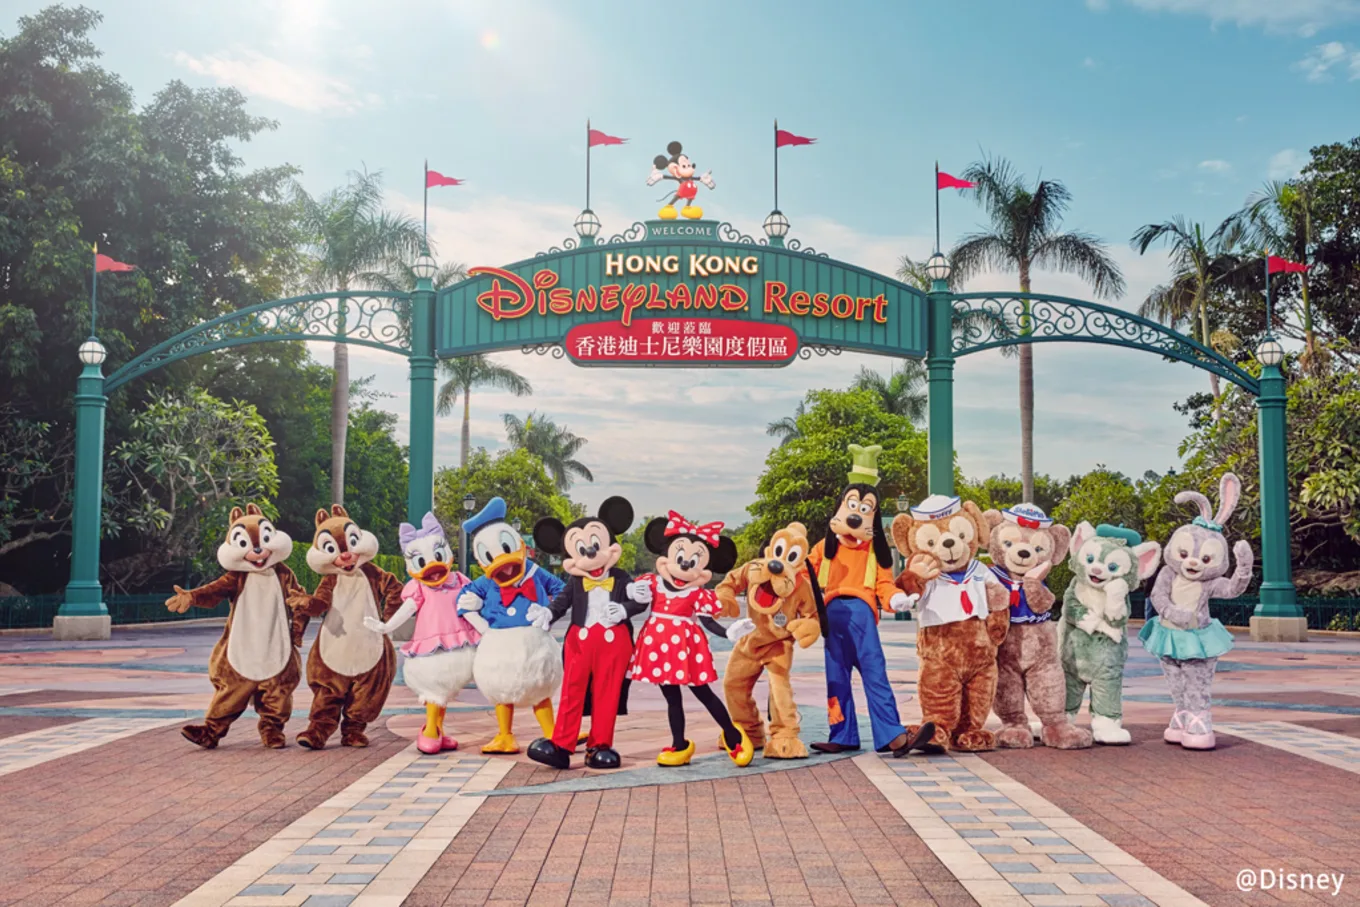 A group photo of iconic Disney characters including Mickey Mouse, Minnie Mouse, Donald Duck, Daisy Duck, Goofy, Pluto, and others standing in front of the entrance gate to Hong Kong Disneyland Resort, with vibrant greenery and clear blue skies in the background.